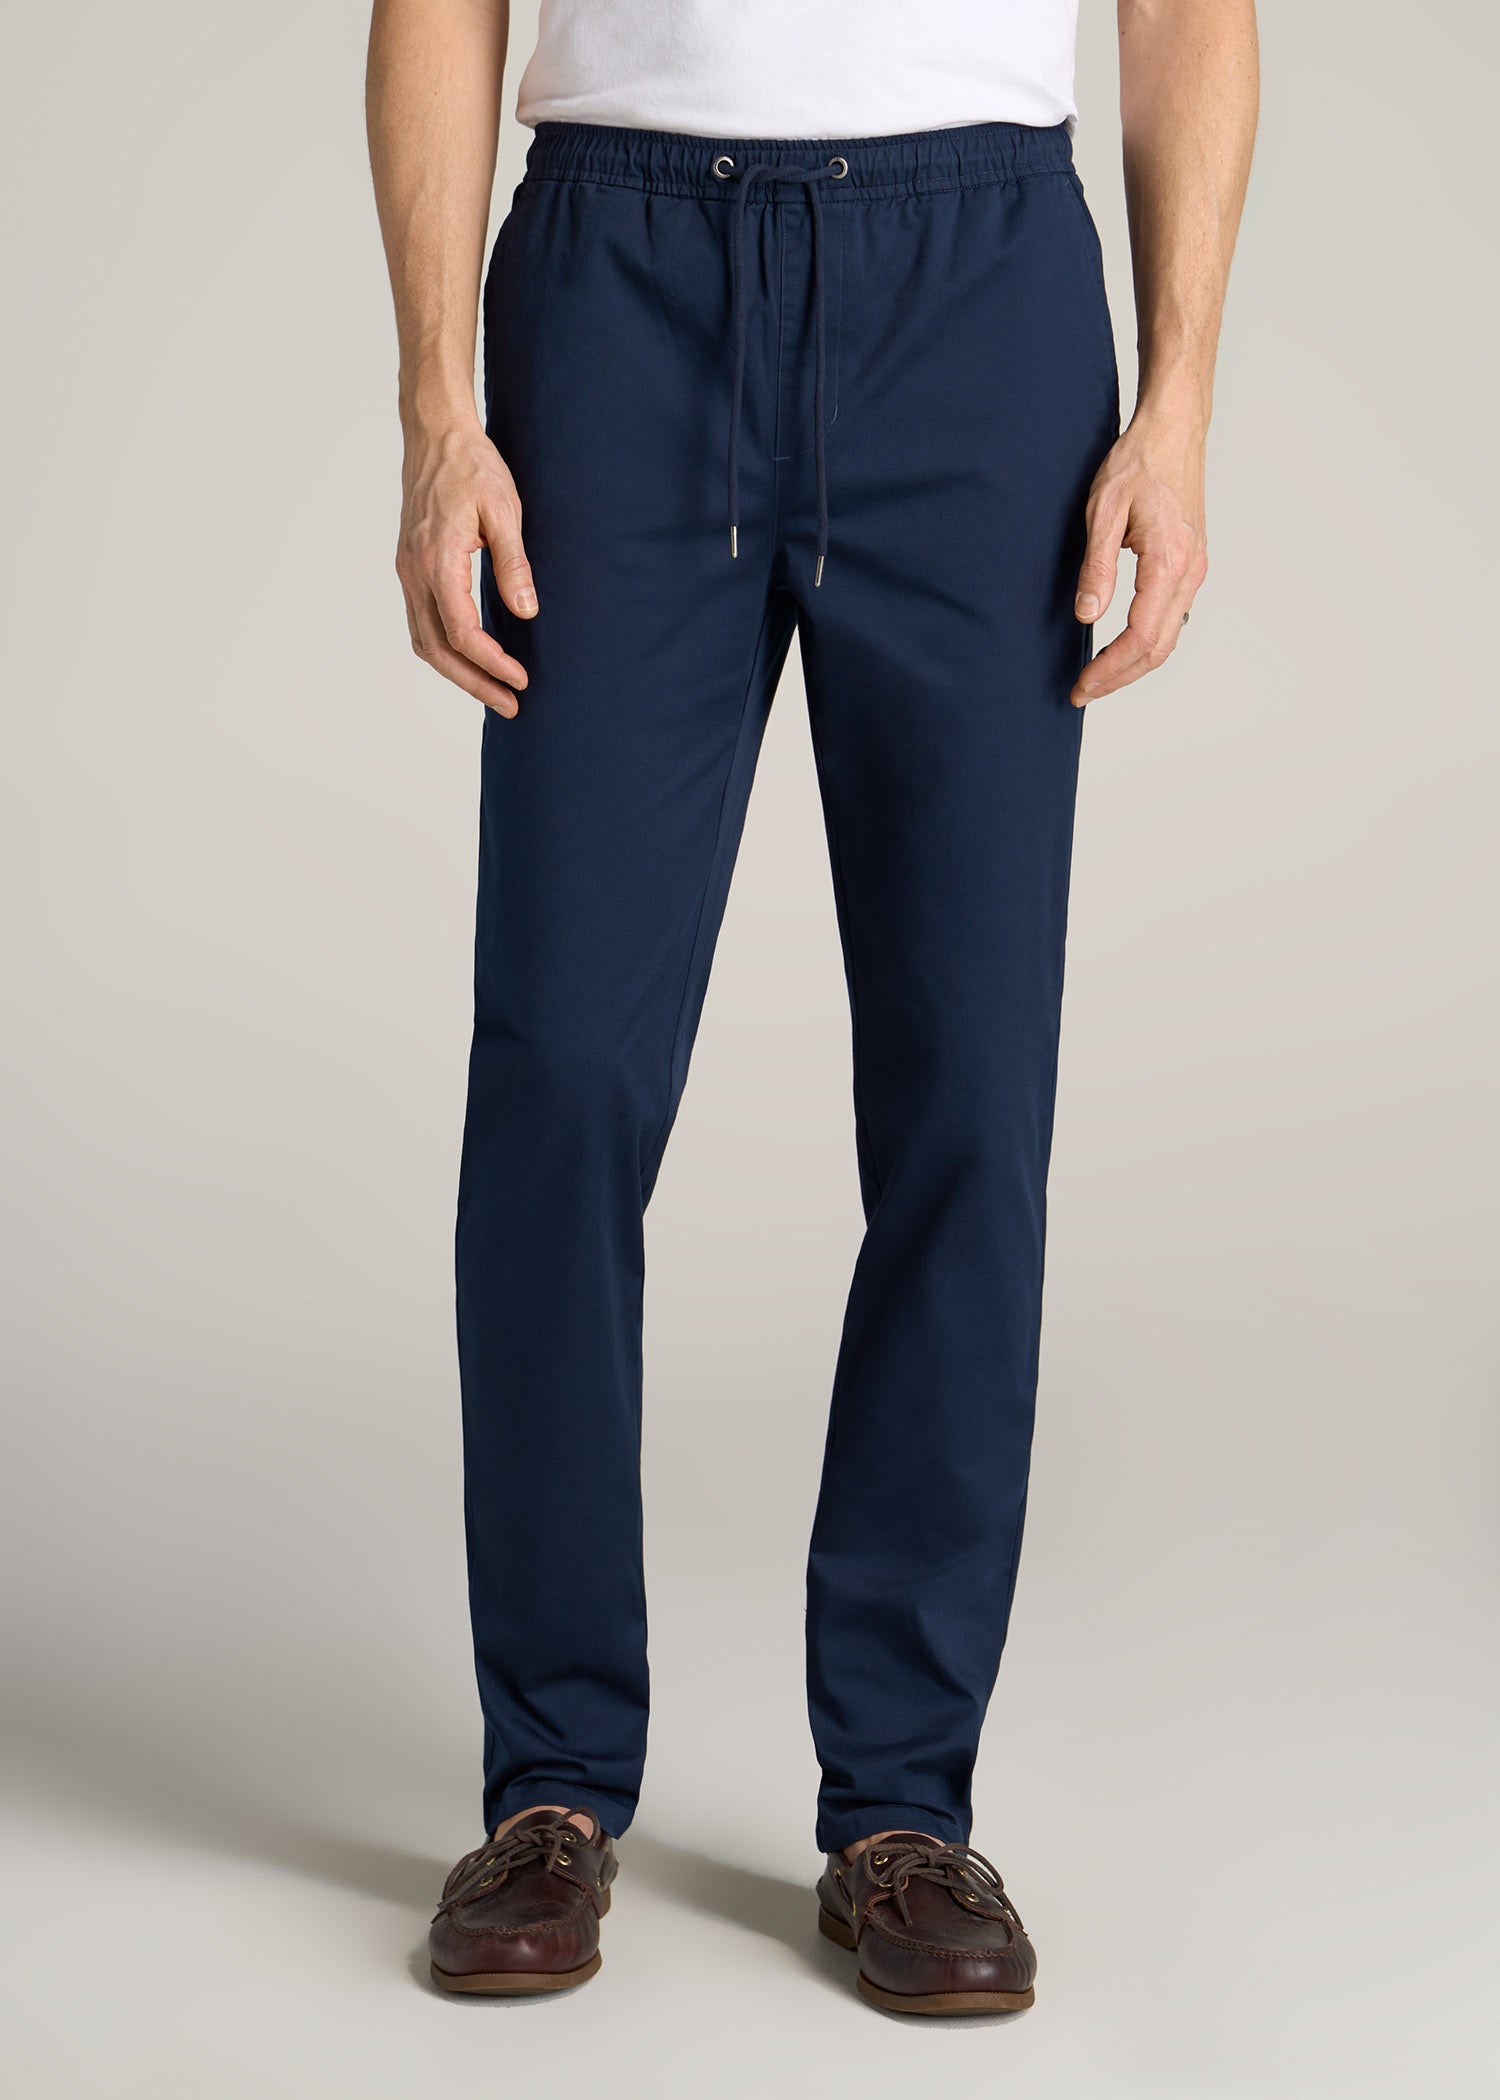 Stretch Pull On Deck Pants For Tall Men Navy | American Tall